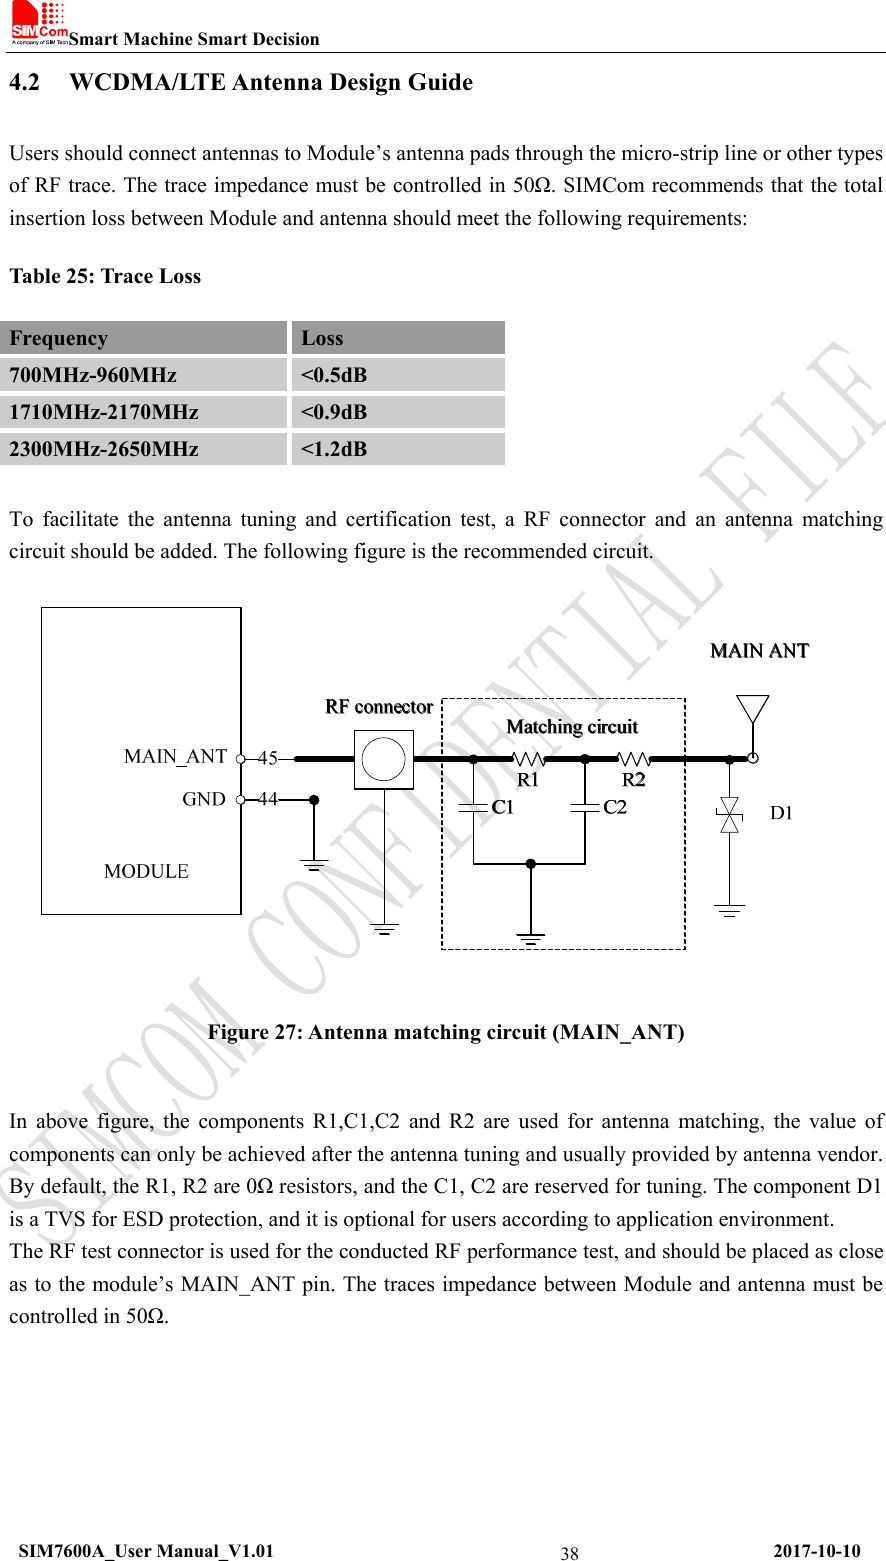 Smart Machine Smart Decision  SIM7600A_User Manual_V1.01                                                     2017-10-10 384.2 WCDMA/LTE Antenna Design Guide Users should connect antennas to Module’s antenna pads through the micro-strip line or other types of RF trace. The trace impedance must be controlled in 50Ω. SIMCom recommends that the total insertion loss between Module and antenna should meet the following requirements: Table 25: Trace Loss Frequency  Loss 700MHz-960MHz  &lt;0.5dB 1710MHz-2170MHz  &lt;0.9dB 2300MHz-2650MHz  &lt;1.2dB  To facilitate the antenna tuning and certification test, a RF connector and an antenna matching circuit should be added. The following figure is the recommended circuit.    Figure 27: Antenna matching circuit (MAIN_ANT)  In above figure, the components R1,C1,C2 and R2 are used for antenna matching, the value of components can only be achieved after the antenna tuning and usually provided by antenna vendor.   By default, the R1, R2 are 0Ω resistors, and the C1, C2 are reserved for tuning. The component D1 is a TVS for ESD protection, and it is optional for users according to application environment. The RF test connector is used for the conducted RF performance test, and should be placed as close as to the module’s MAIN_ANT pin. The traces impedance between Module and antenna must be controlled in 50Ω.  